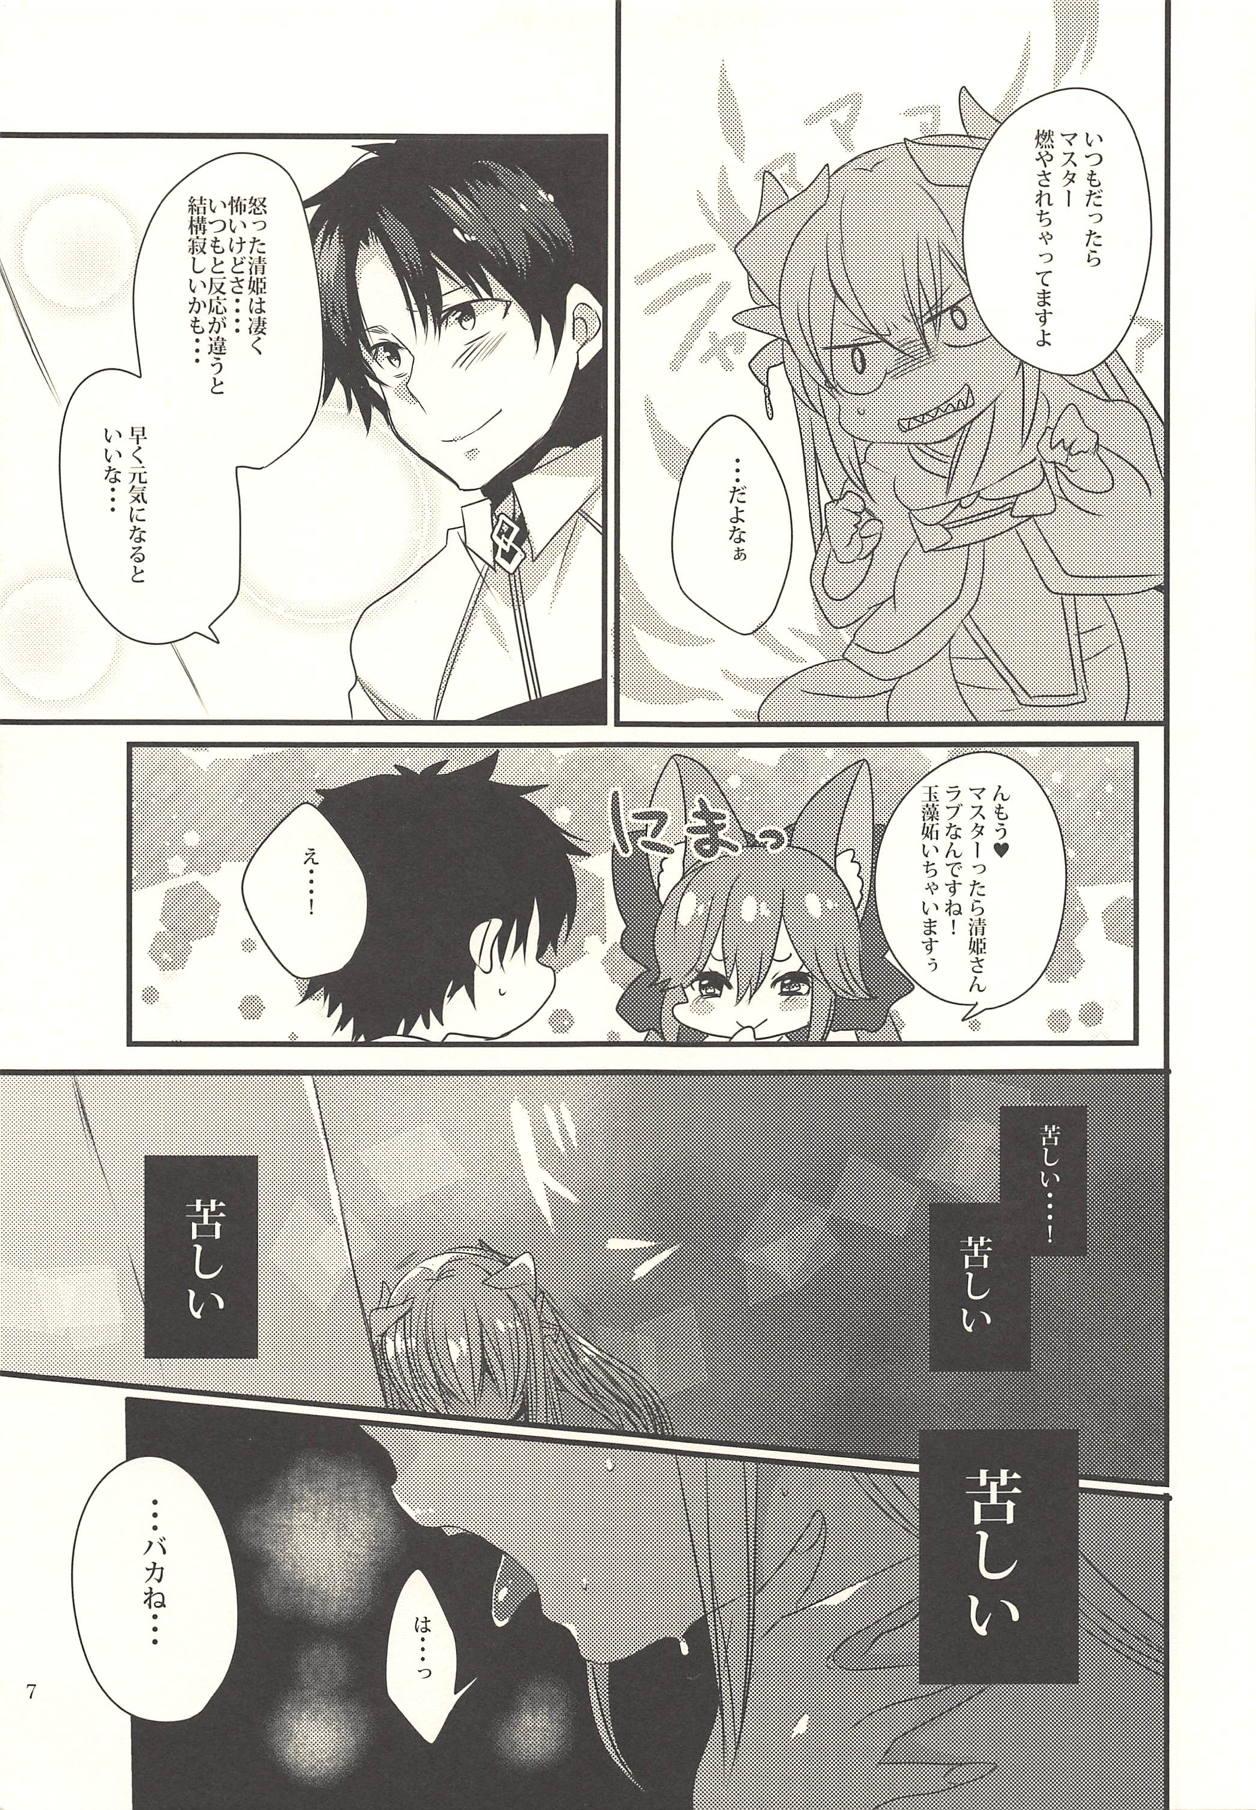 From Koiwazurai - Fate grand order Gilf - Page 6